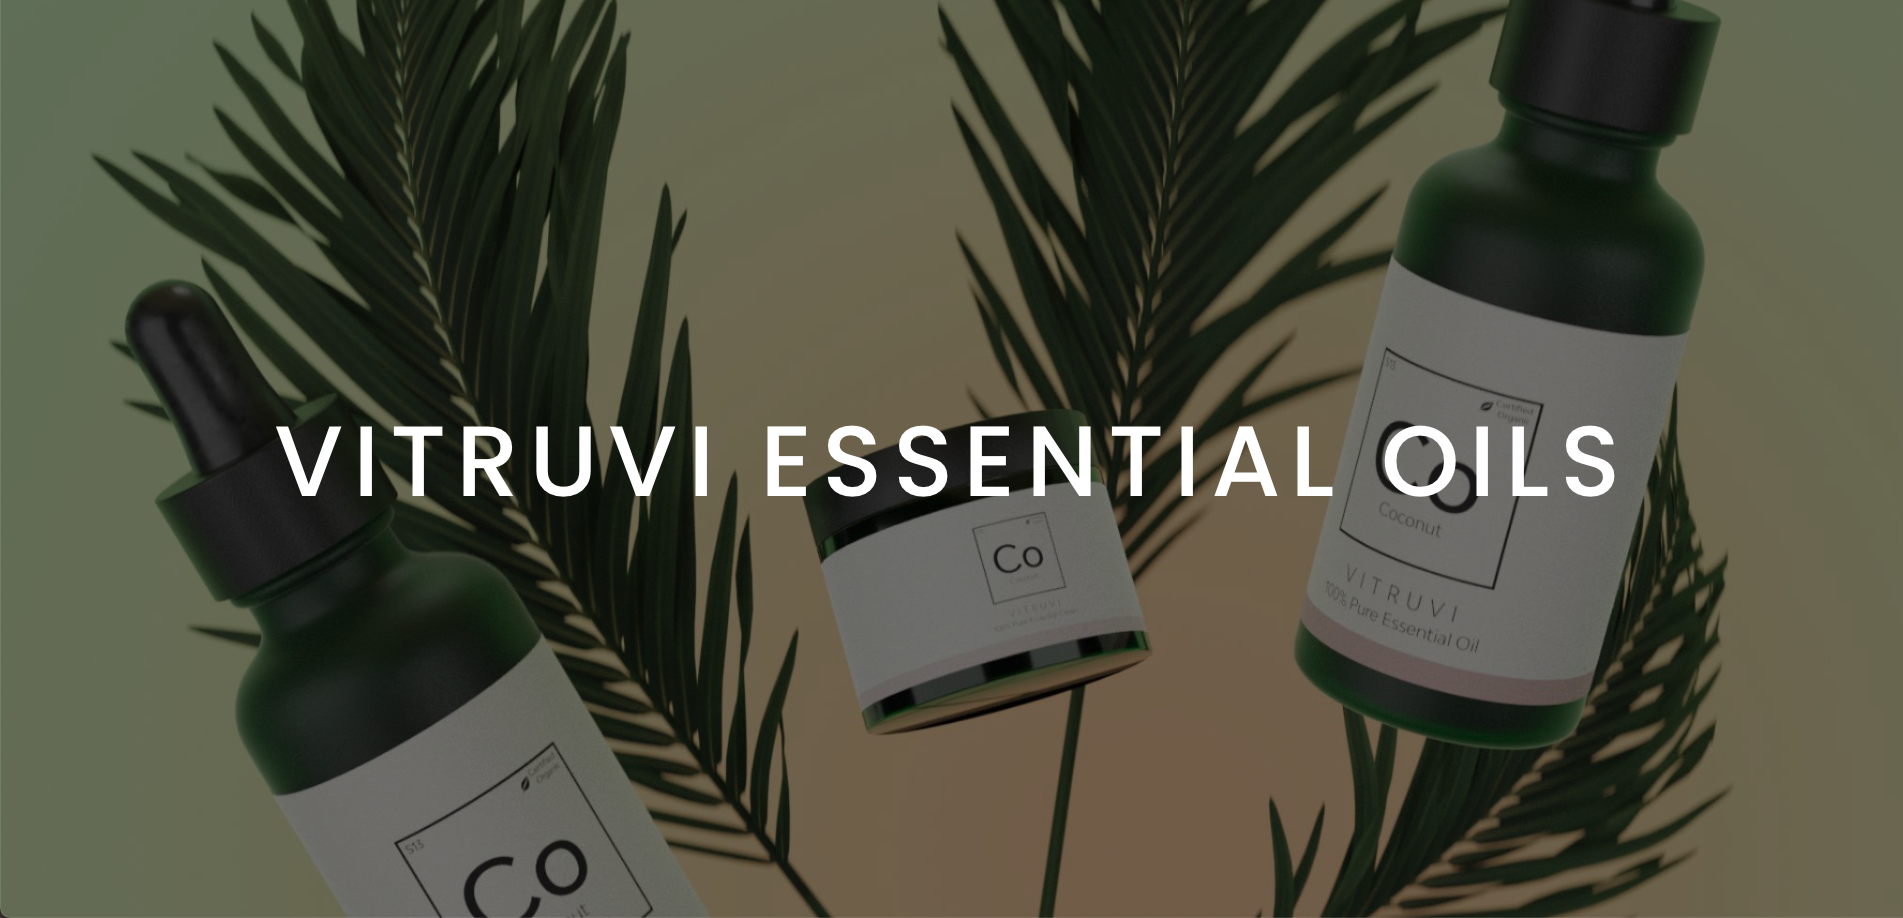 VITRUVI ESSENTIAL OILS Featured Image with white logo on backdrop of cream, drop and spray containers with herbs